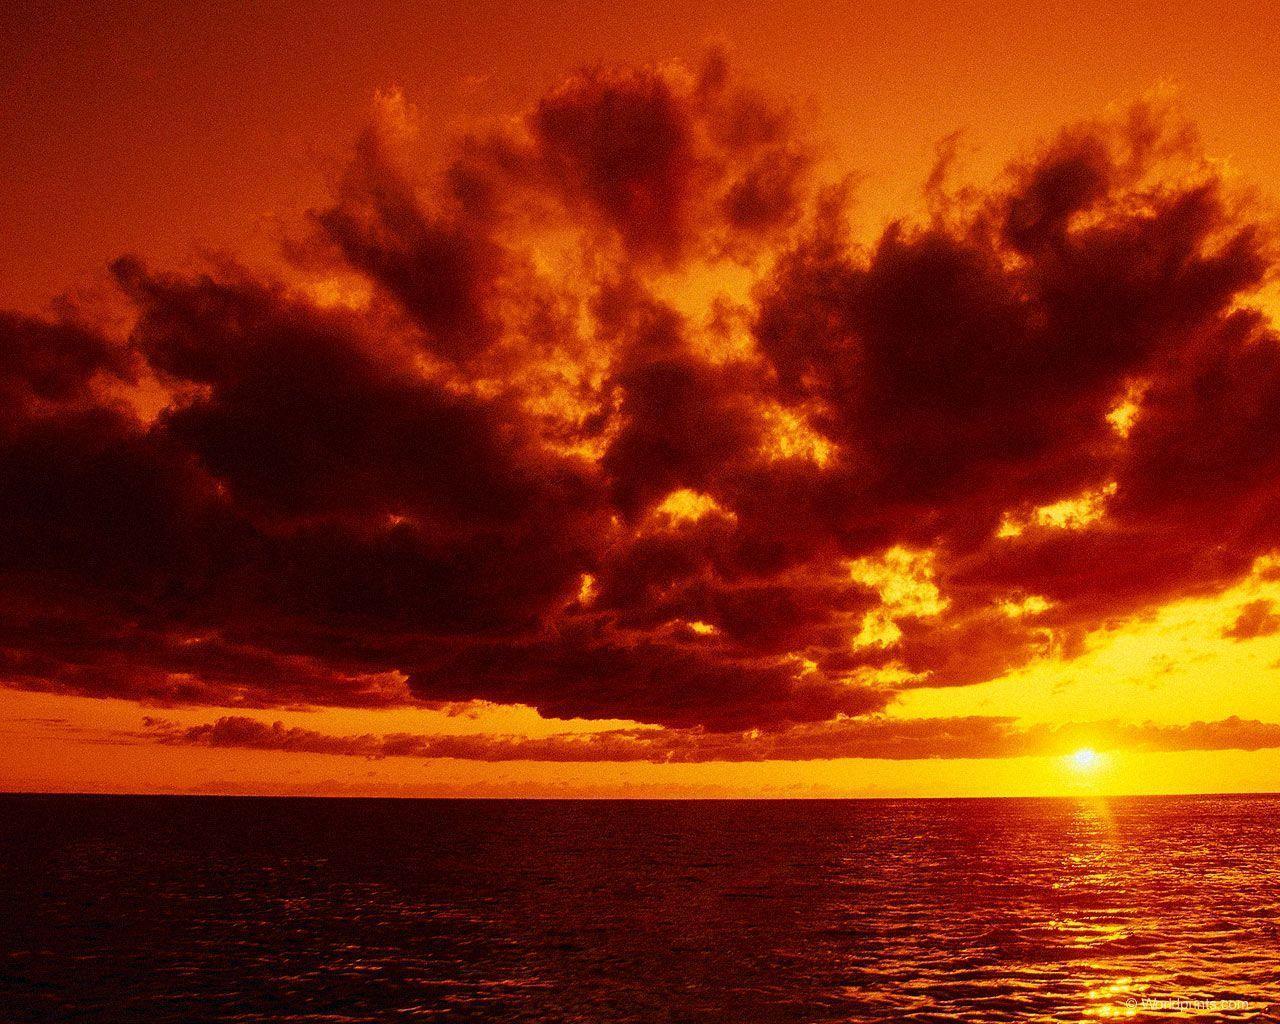 Hawaii Sunset Wallpaper Image featuring Sunrises And Sunsets